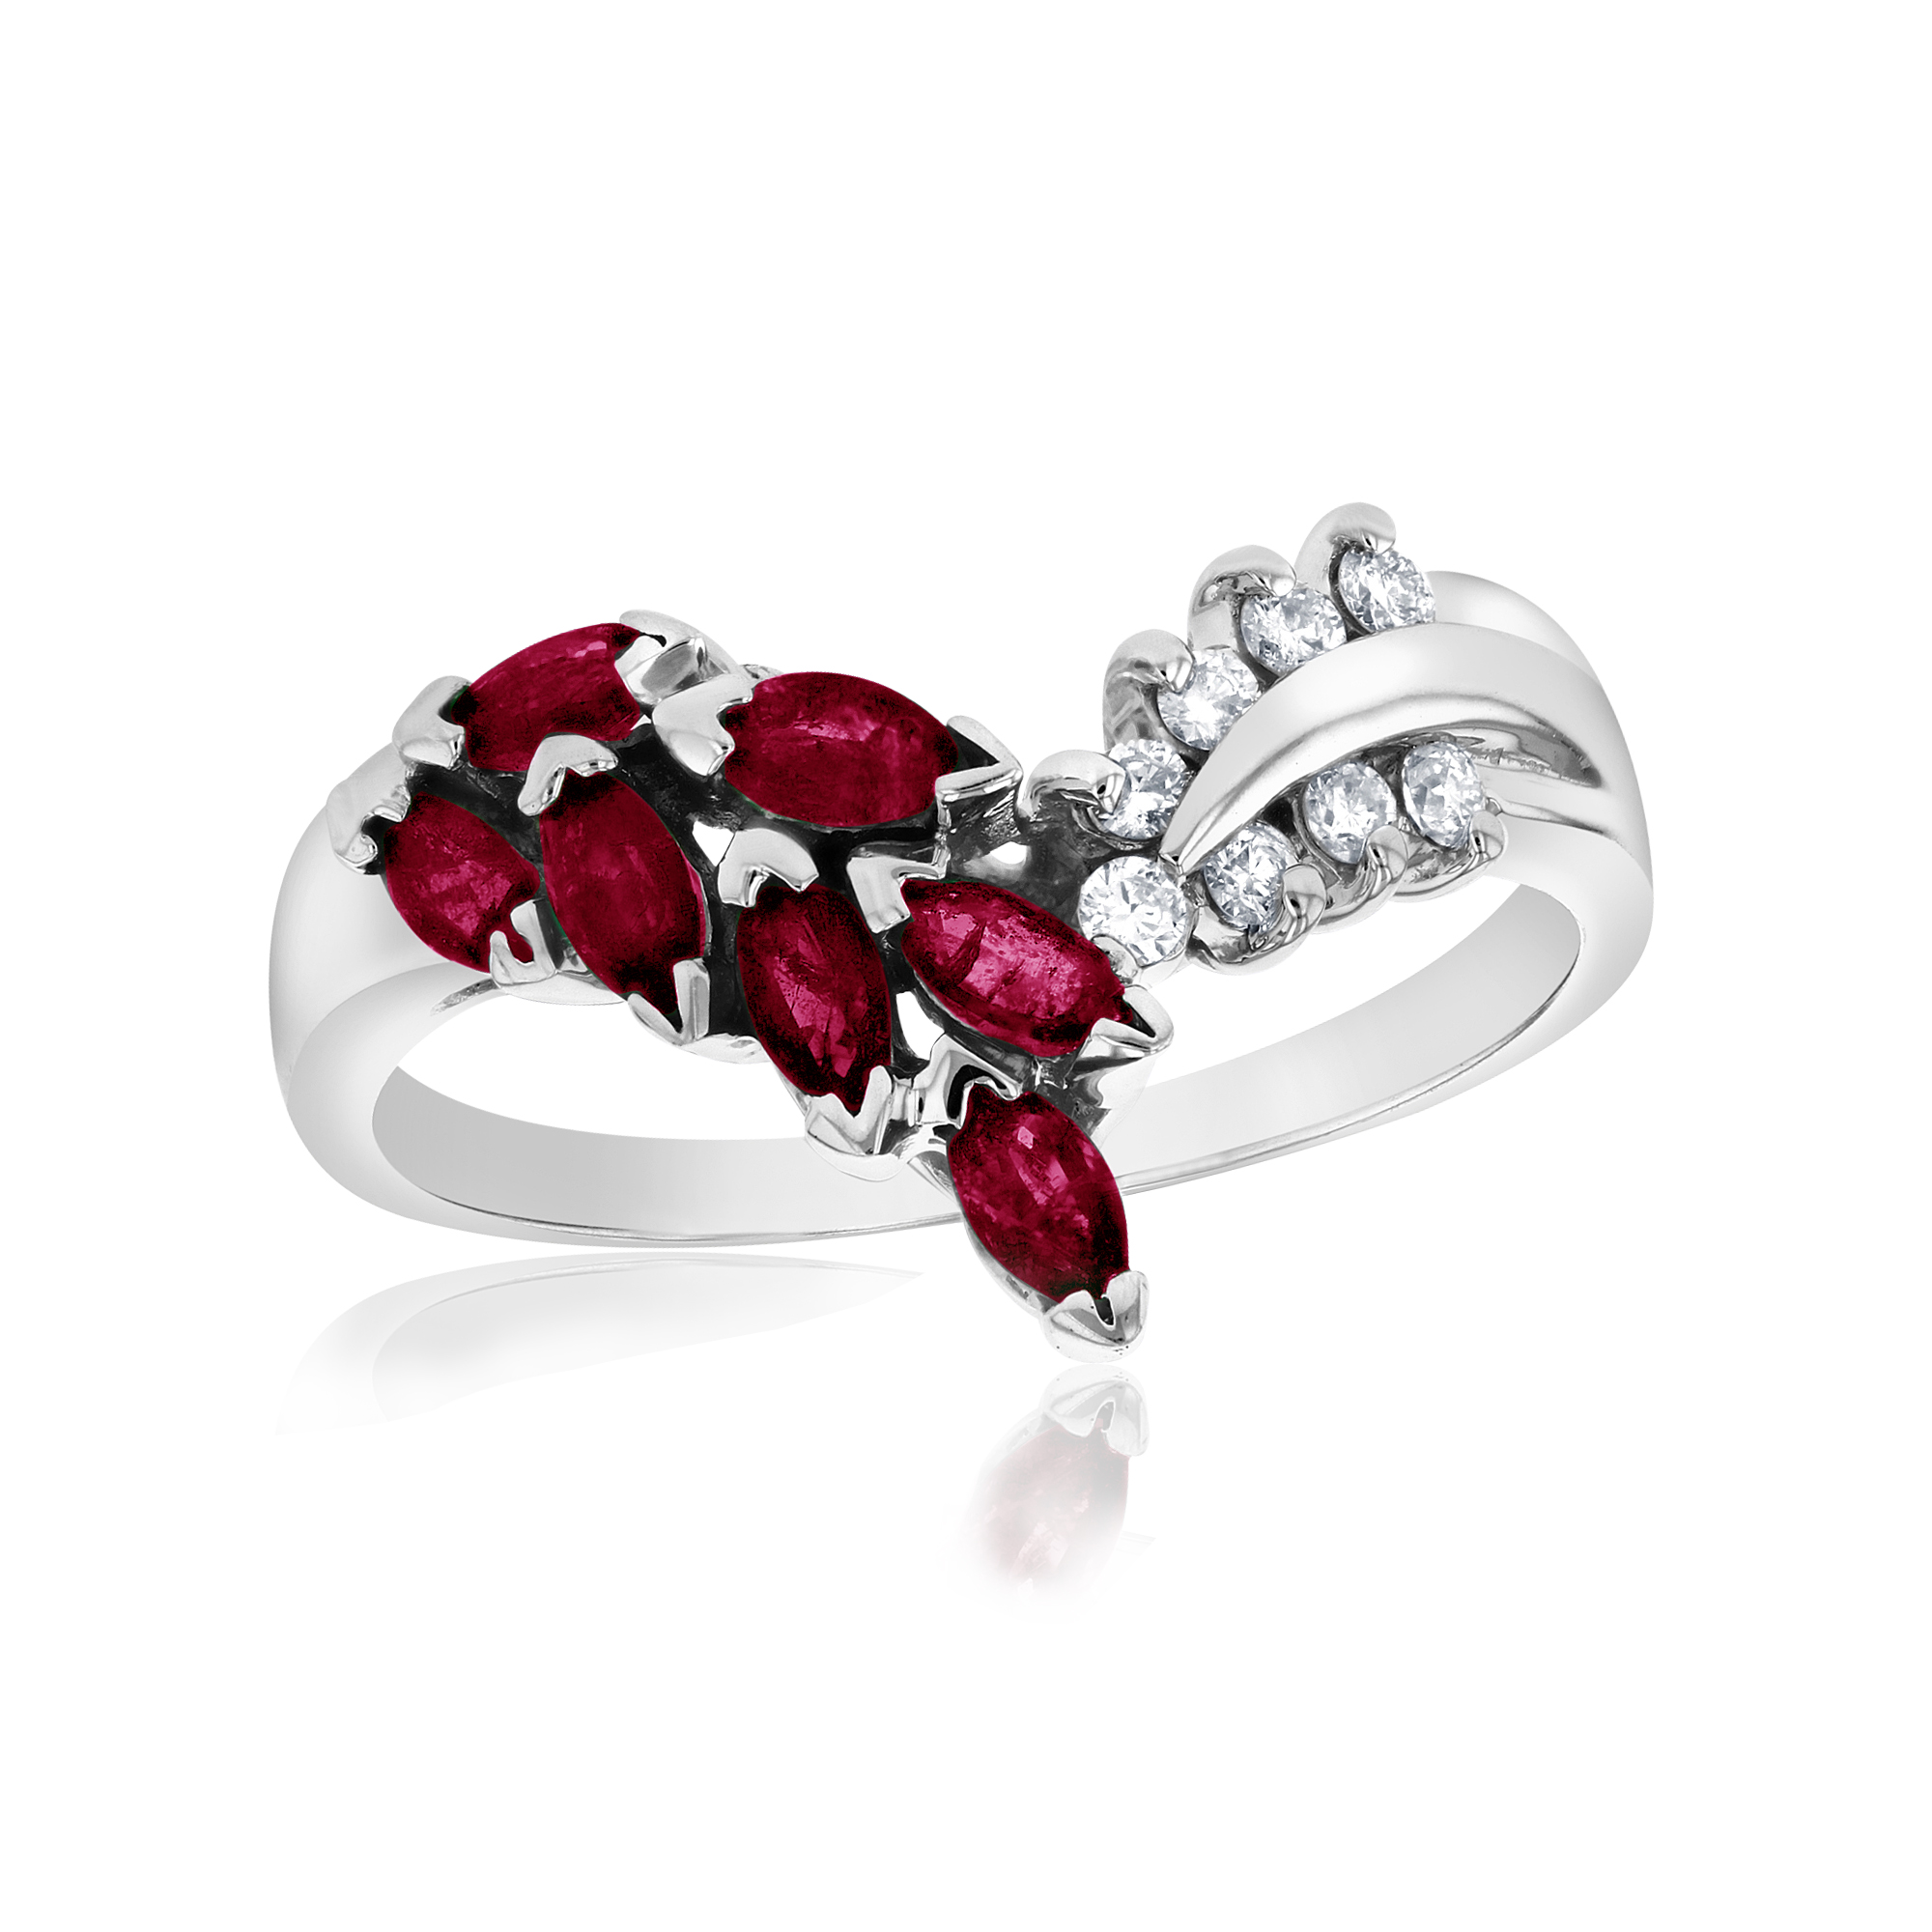 View 0.10ctw Diamonds and Ruby Fashion Ring in 14k White Gold